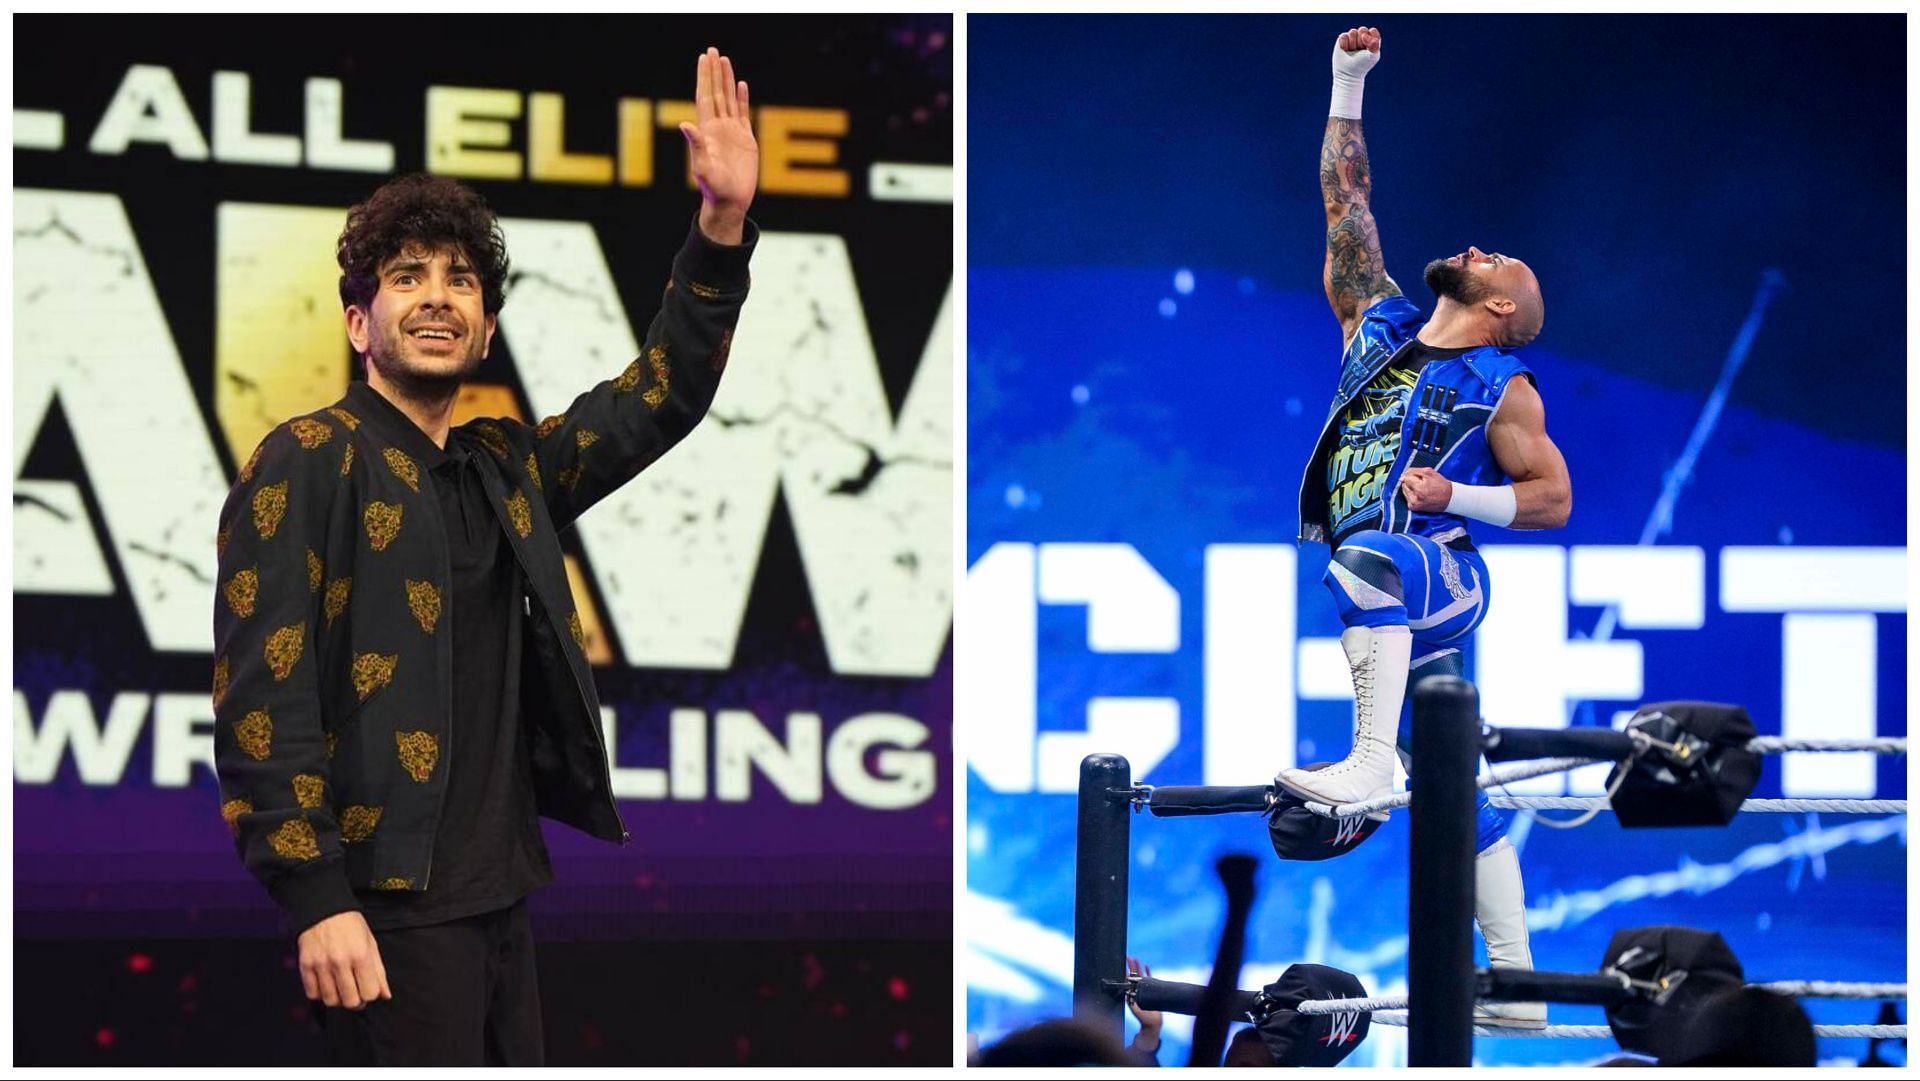 Tony Khan waves in front of the AEW logo, Ricochet at a WWE live event